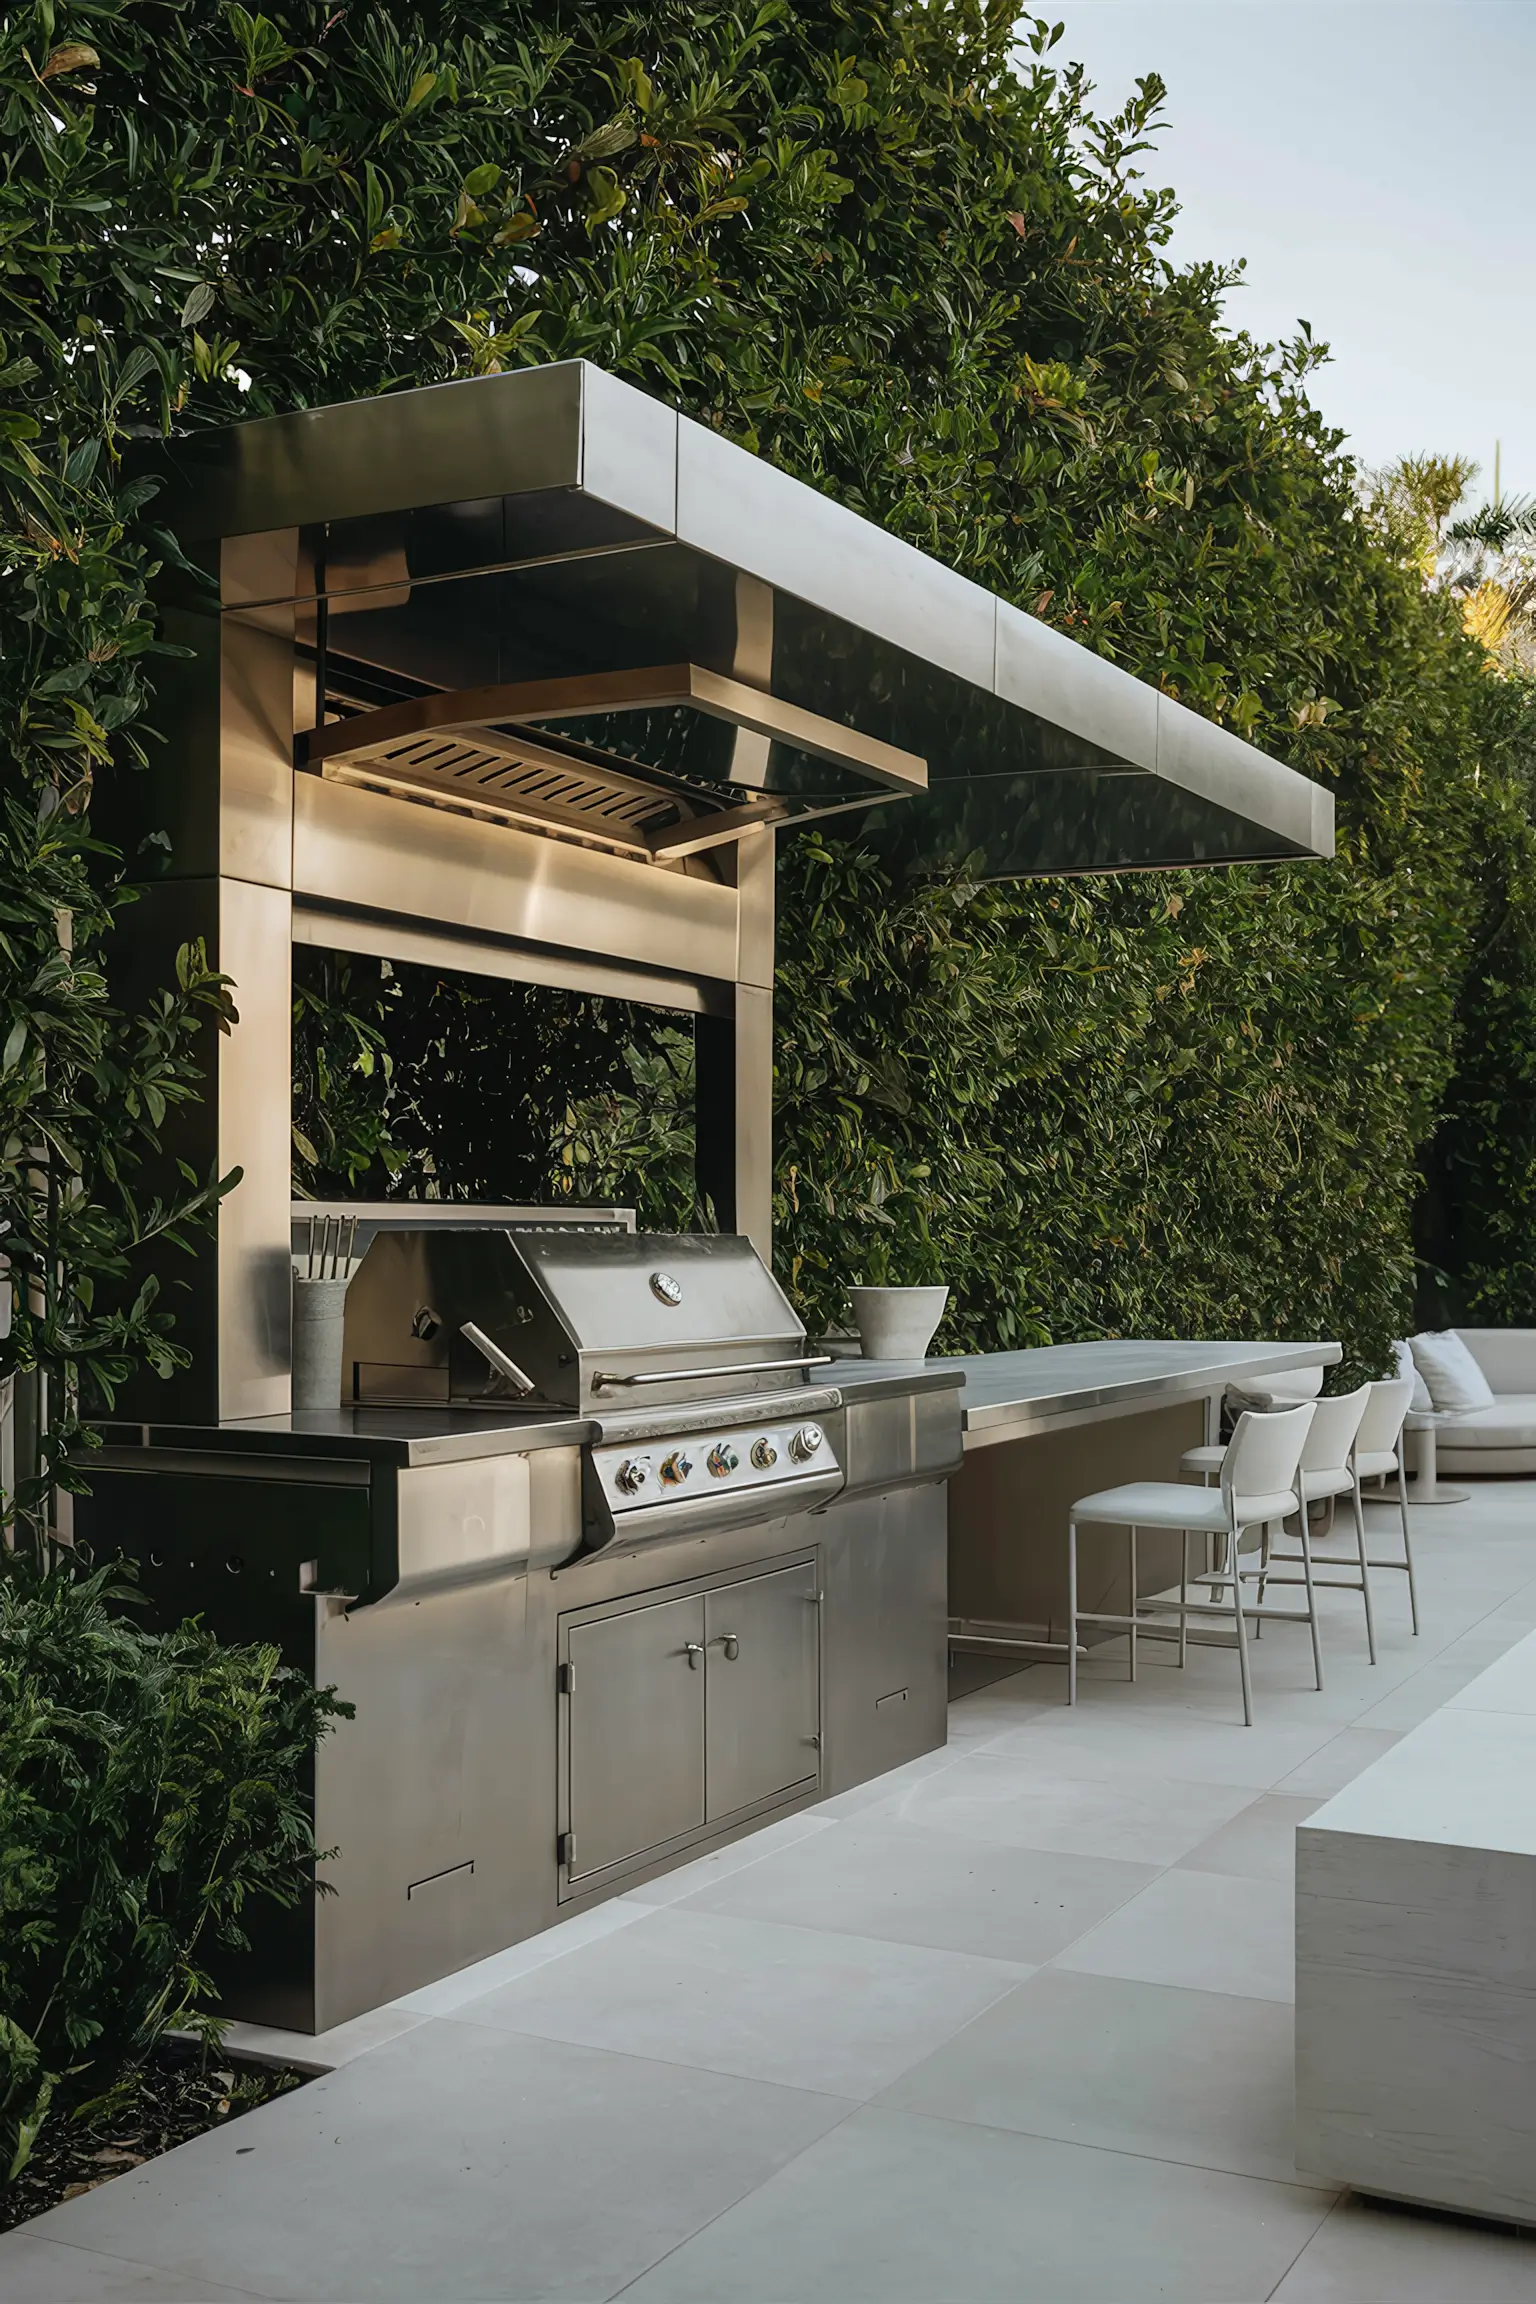 Modern outdoor grill station surrounded by greenery.